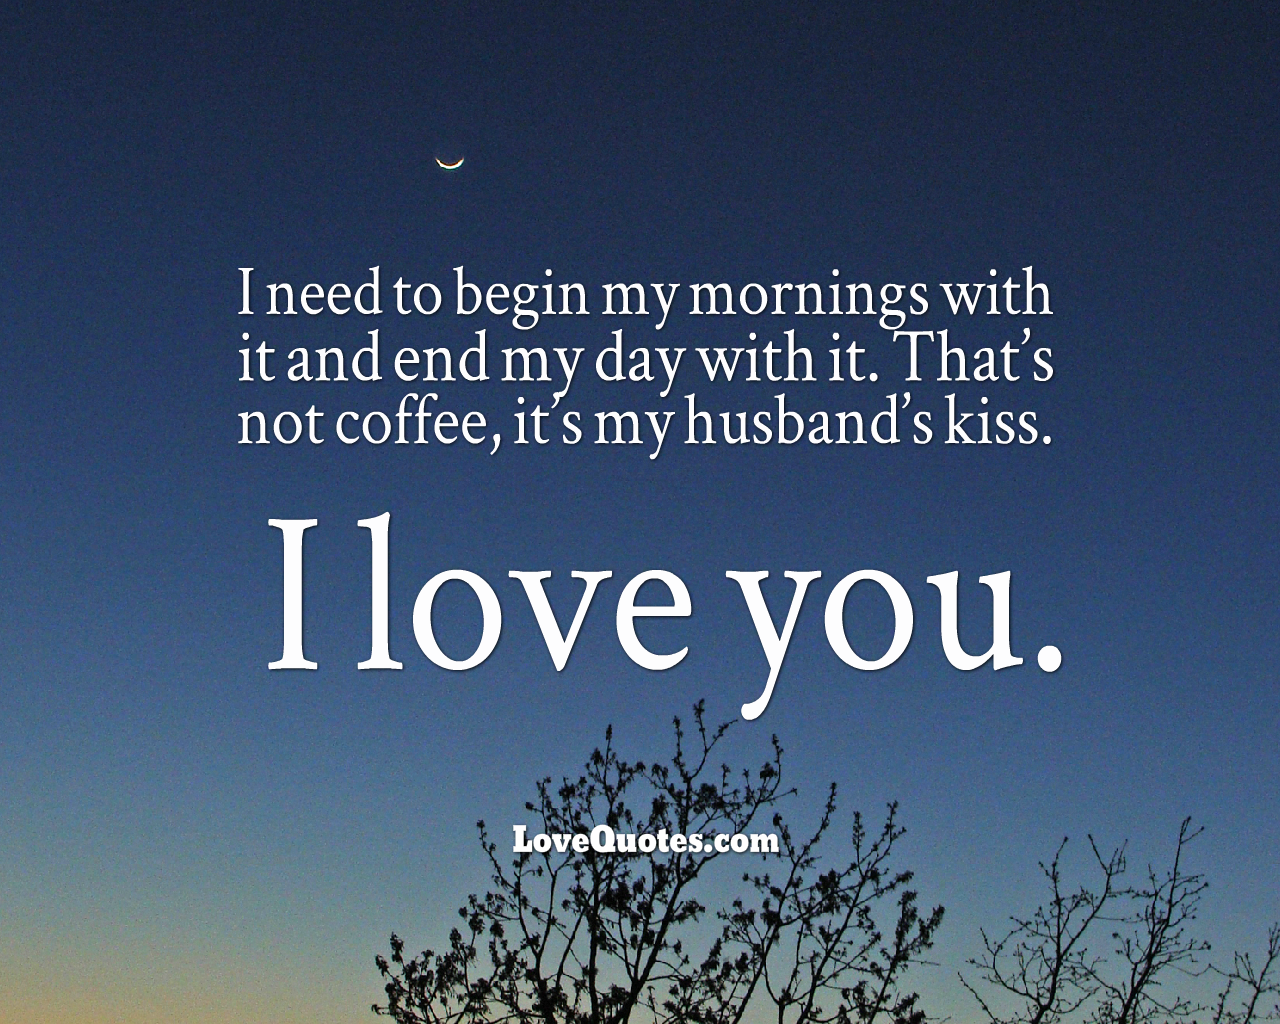 My Husbands Kiss - Love Quotes